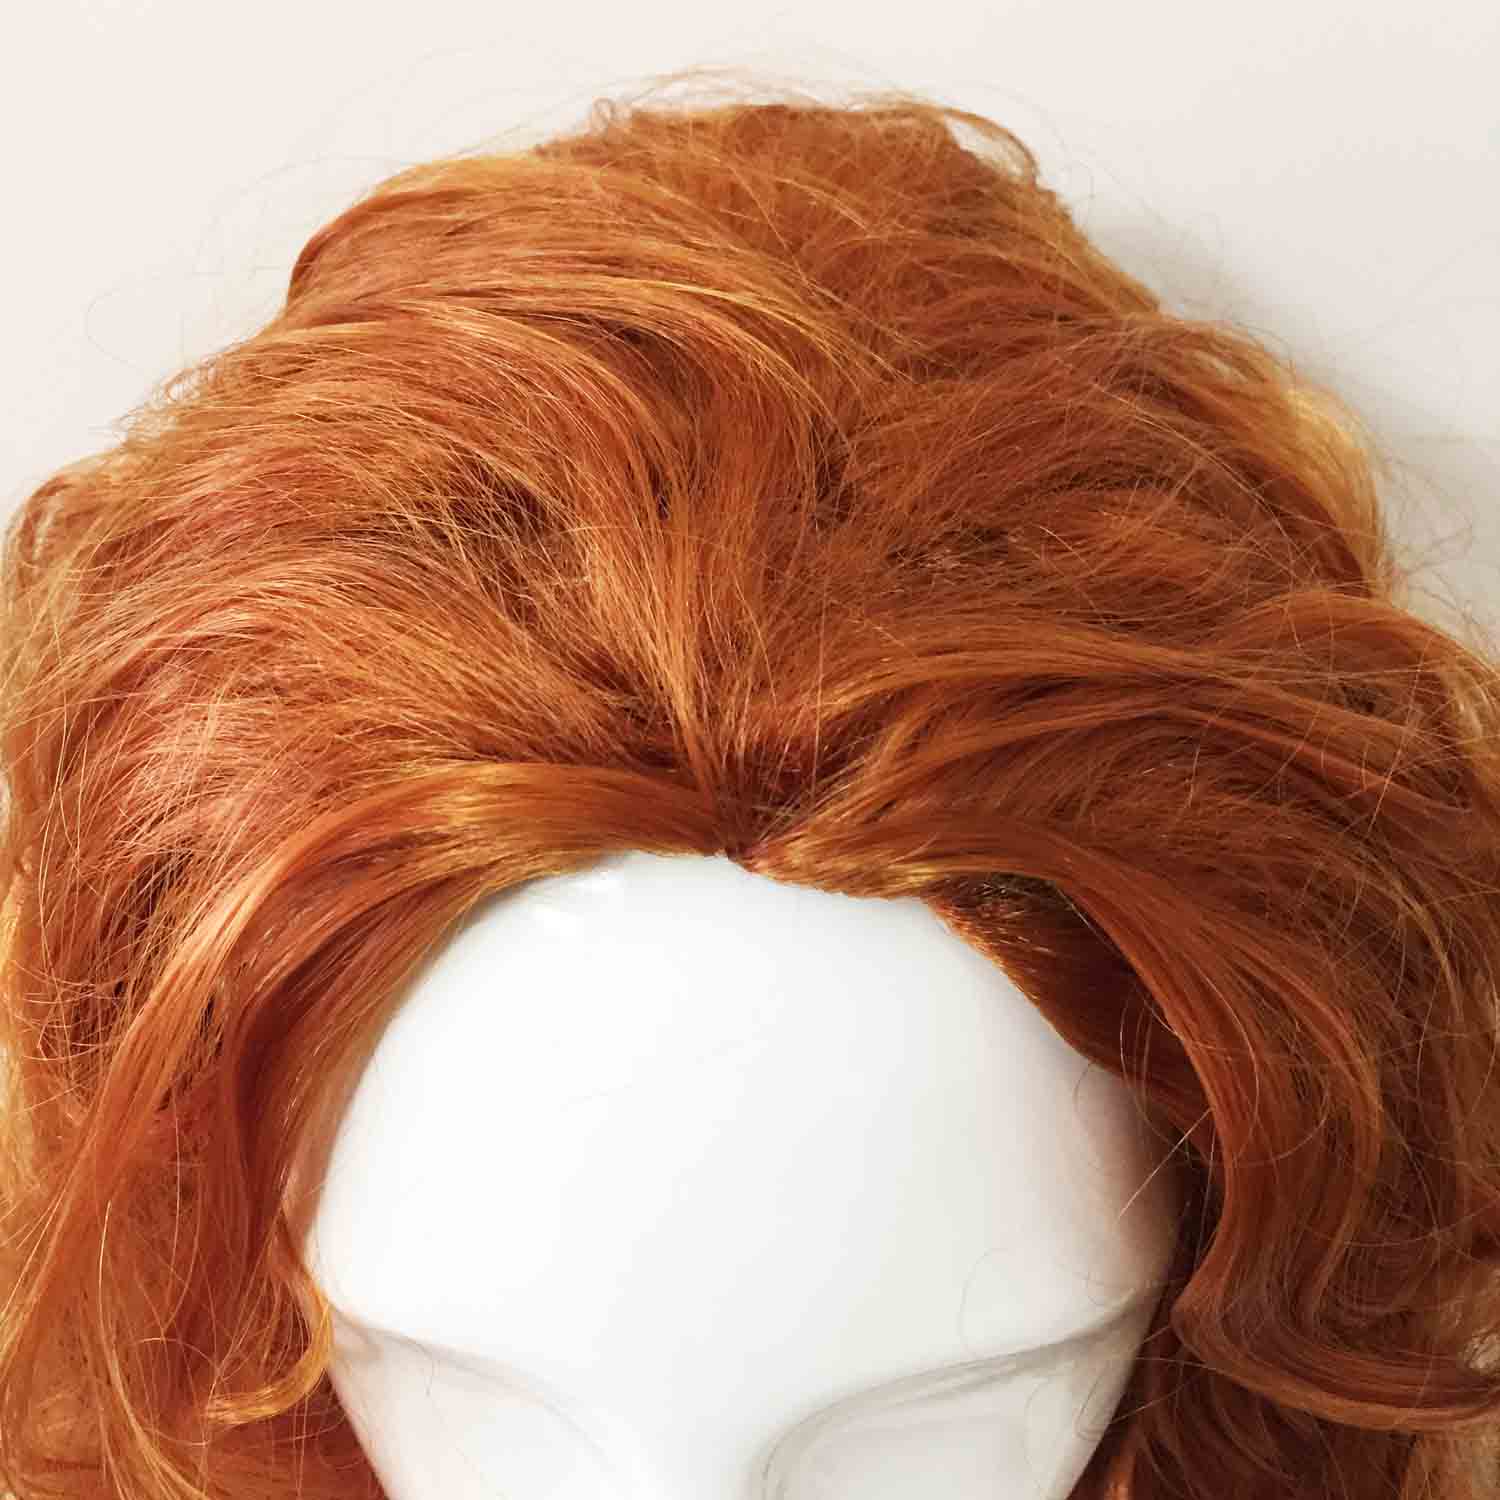 nevermindyrhead Women Ginger Brown Long Curly Slicked Back Cosplay Wig